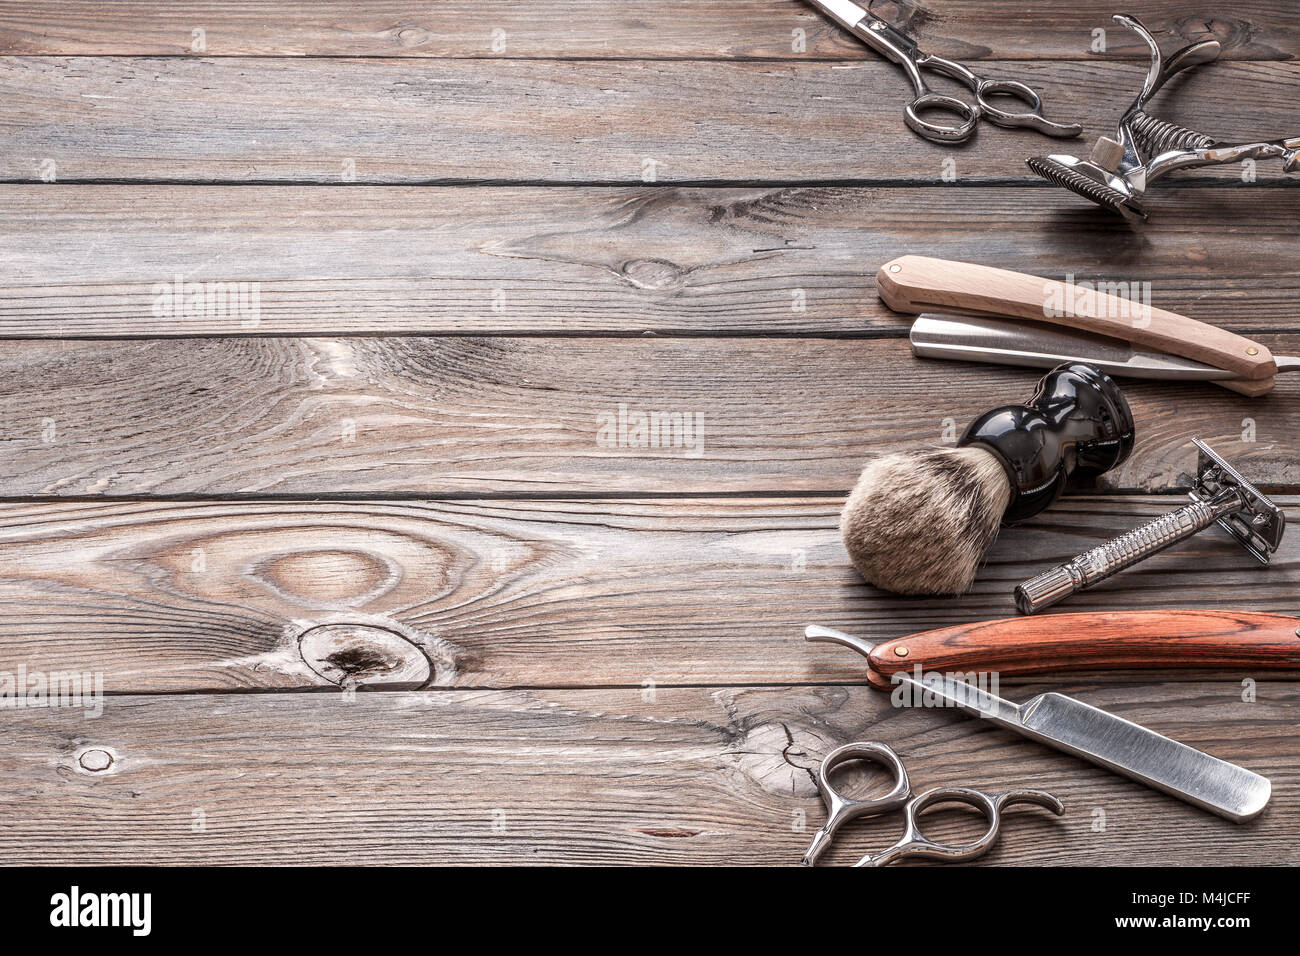 Vintage barber shop tools on wooden background Stock Photo - Alamy